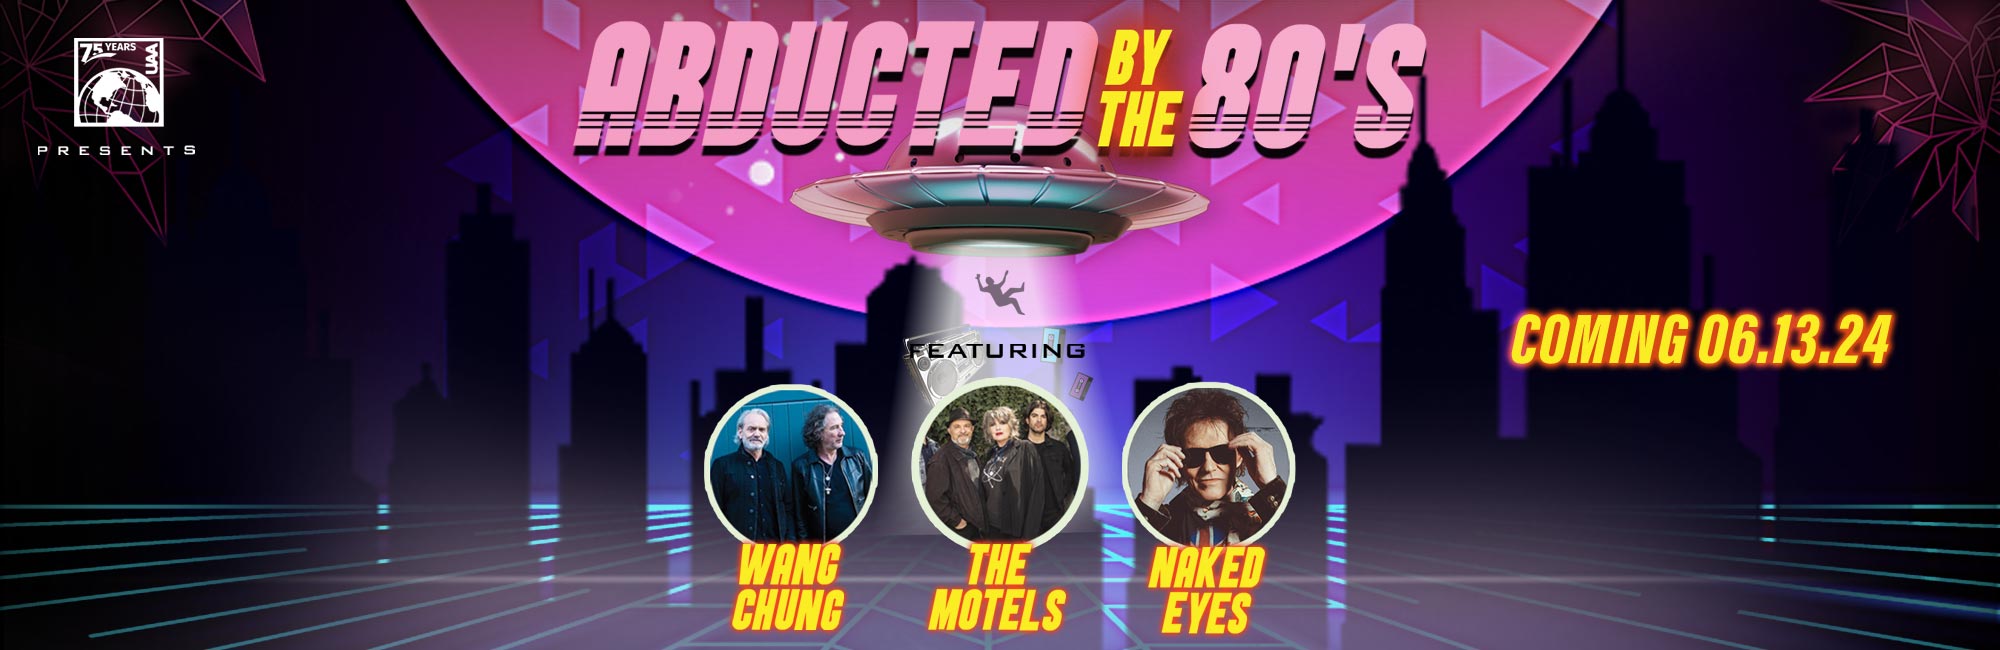 Abducted by the 80’s with Wang Chung, The Motels & Naked Eyes